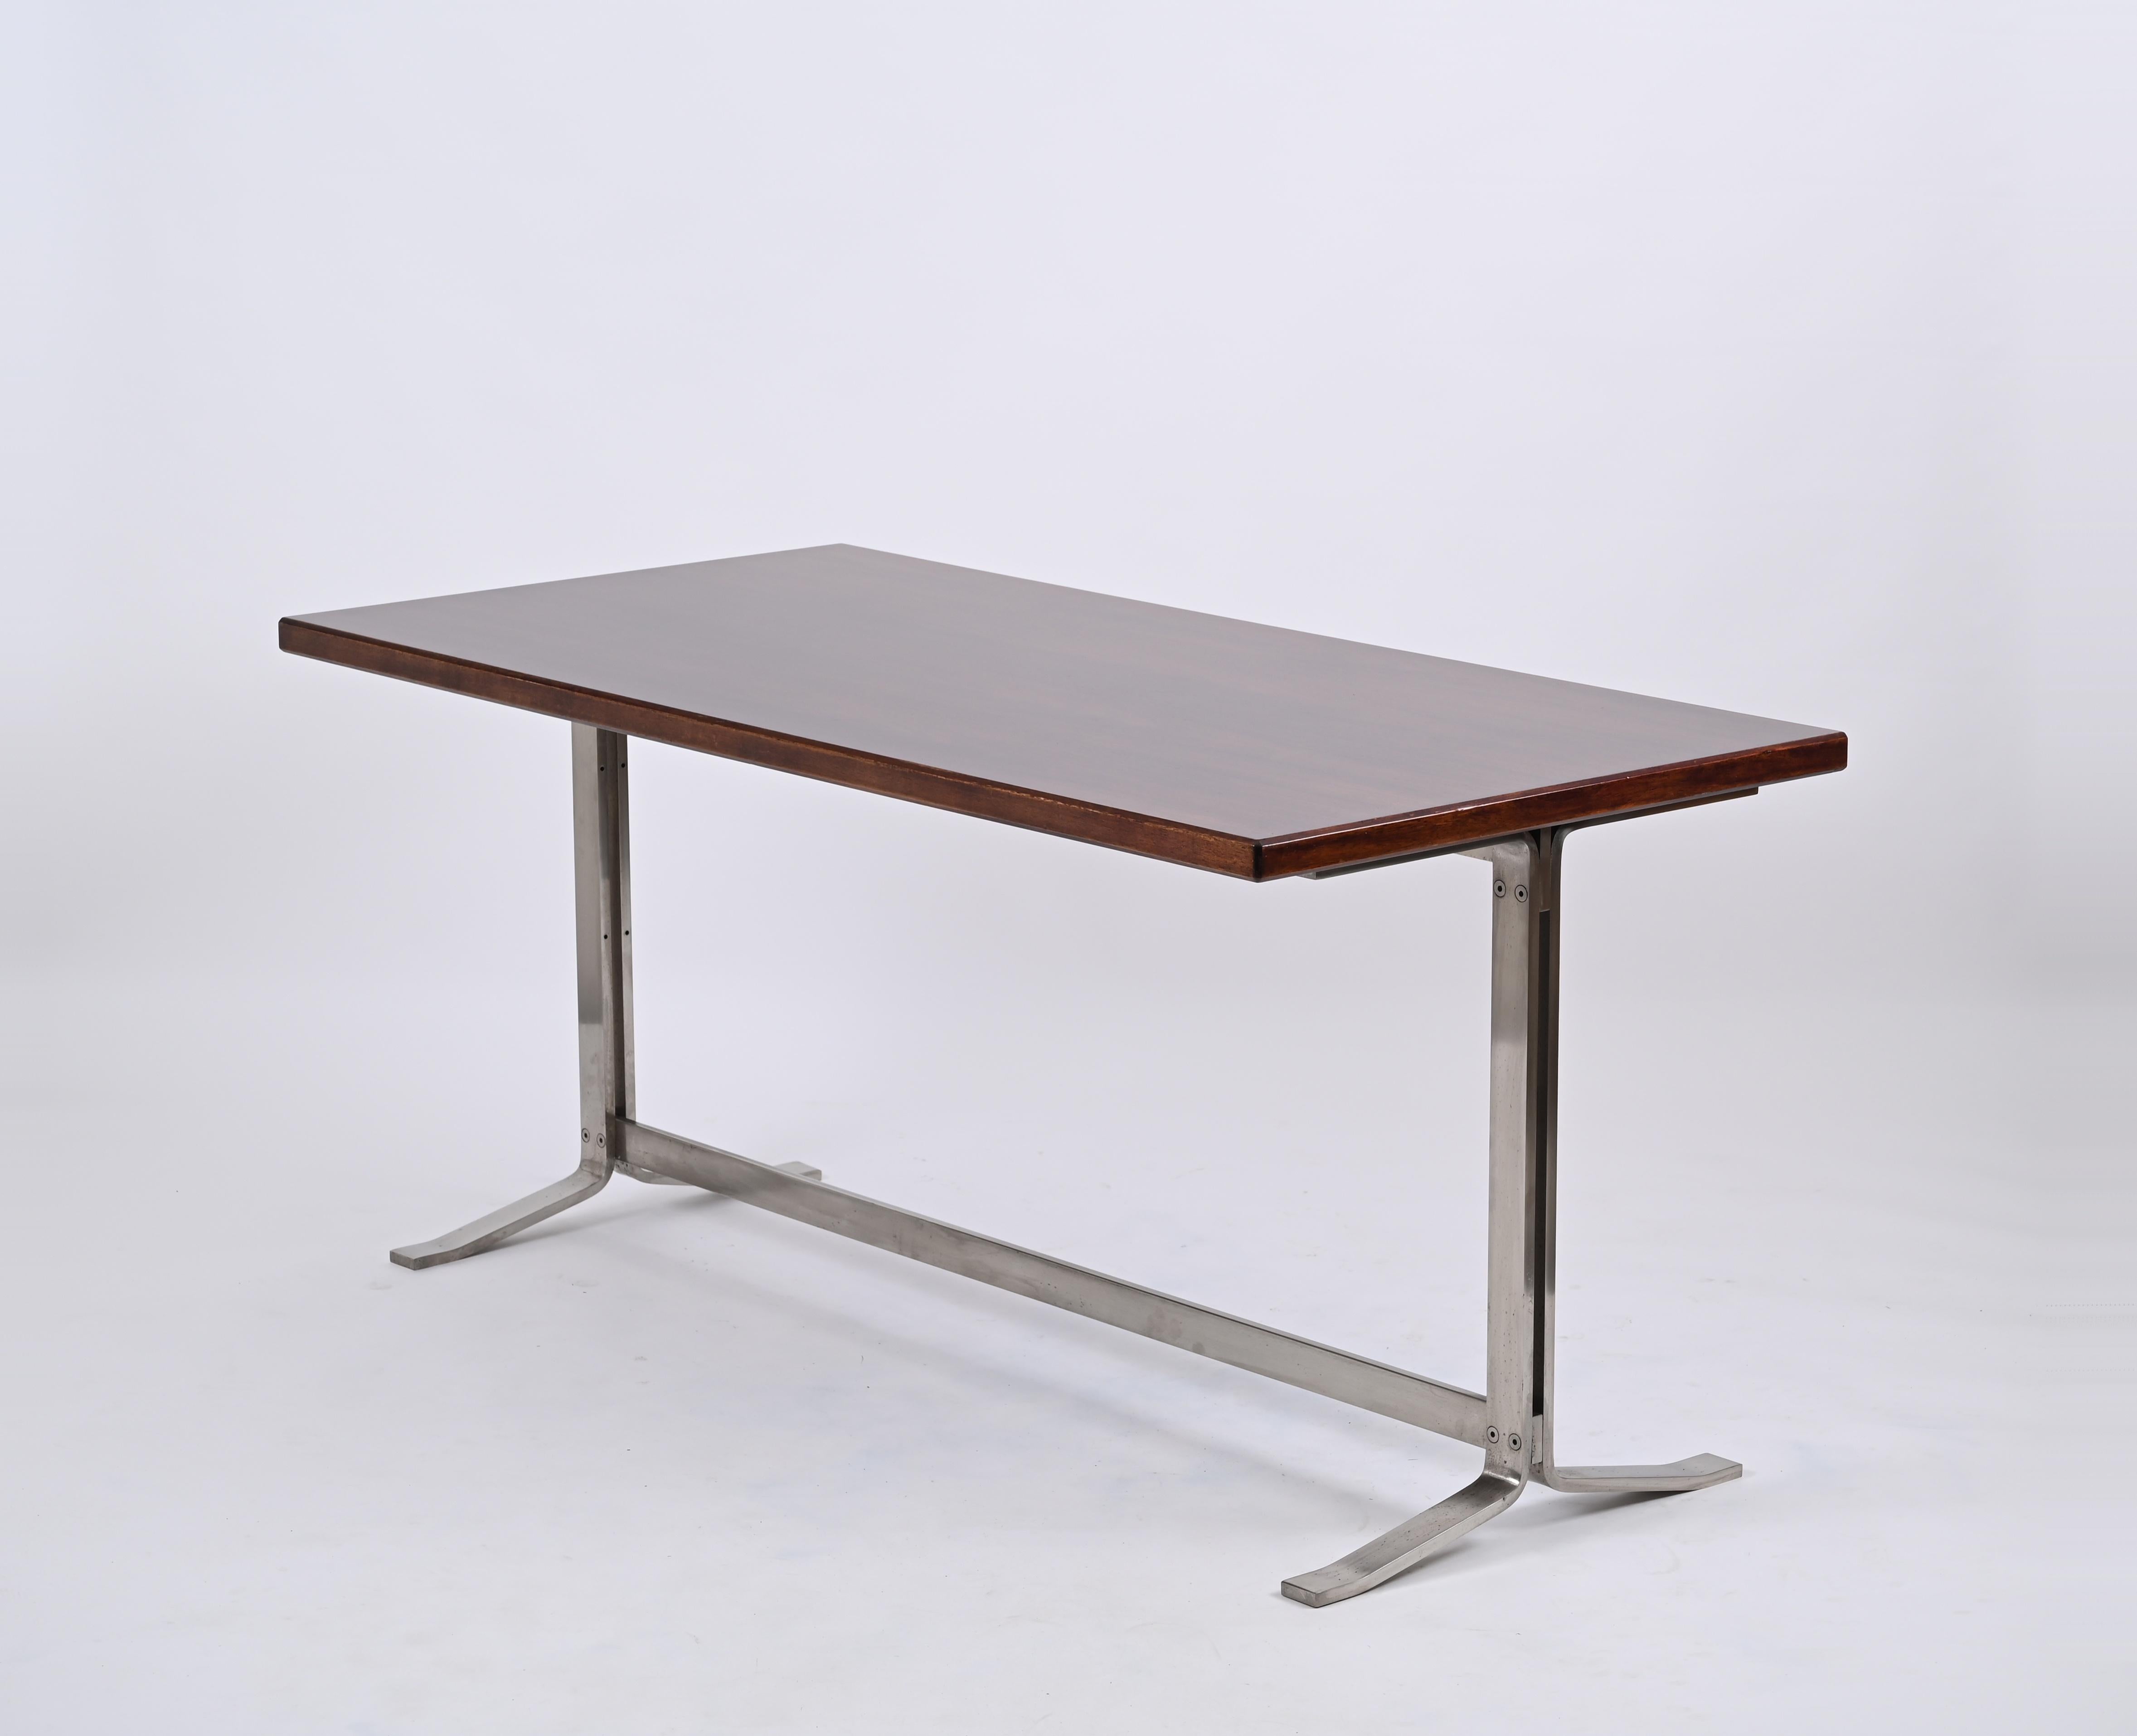 Midcentury Desk in Walnut and Steel by Moscatelli for Formanova, Italy, 1965 For Sale 10